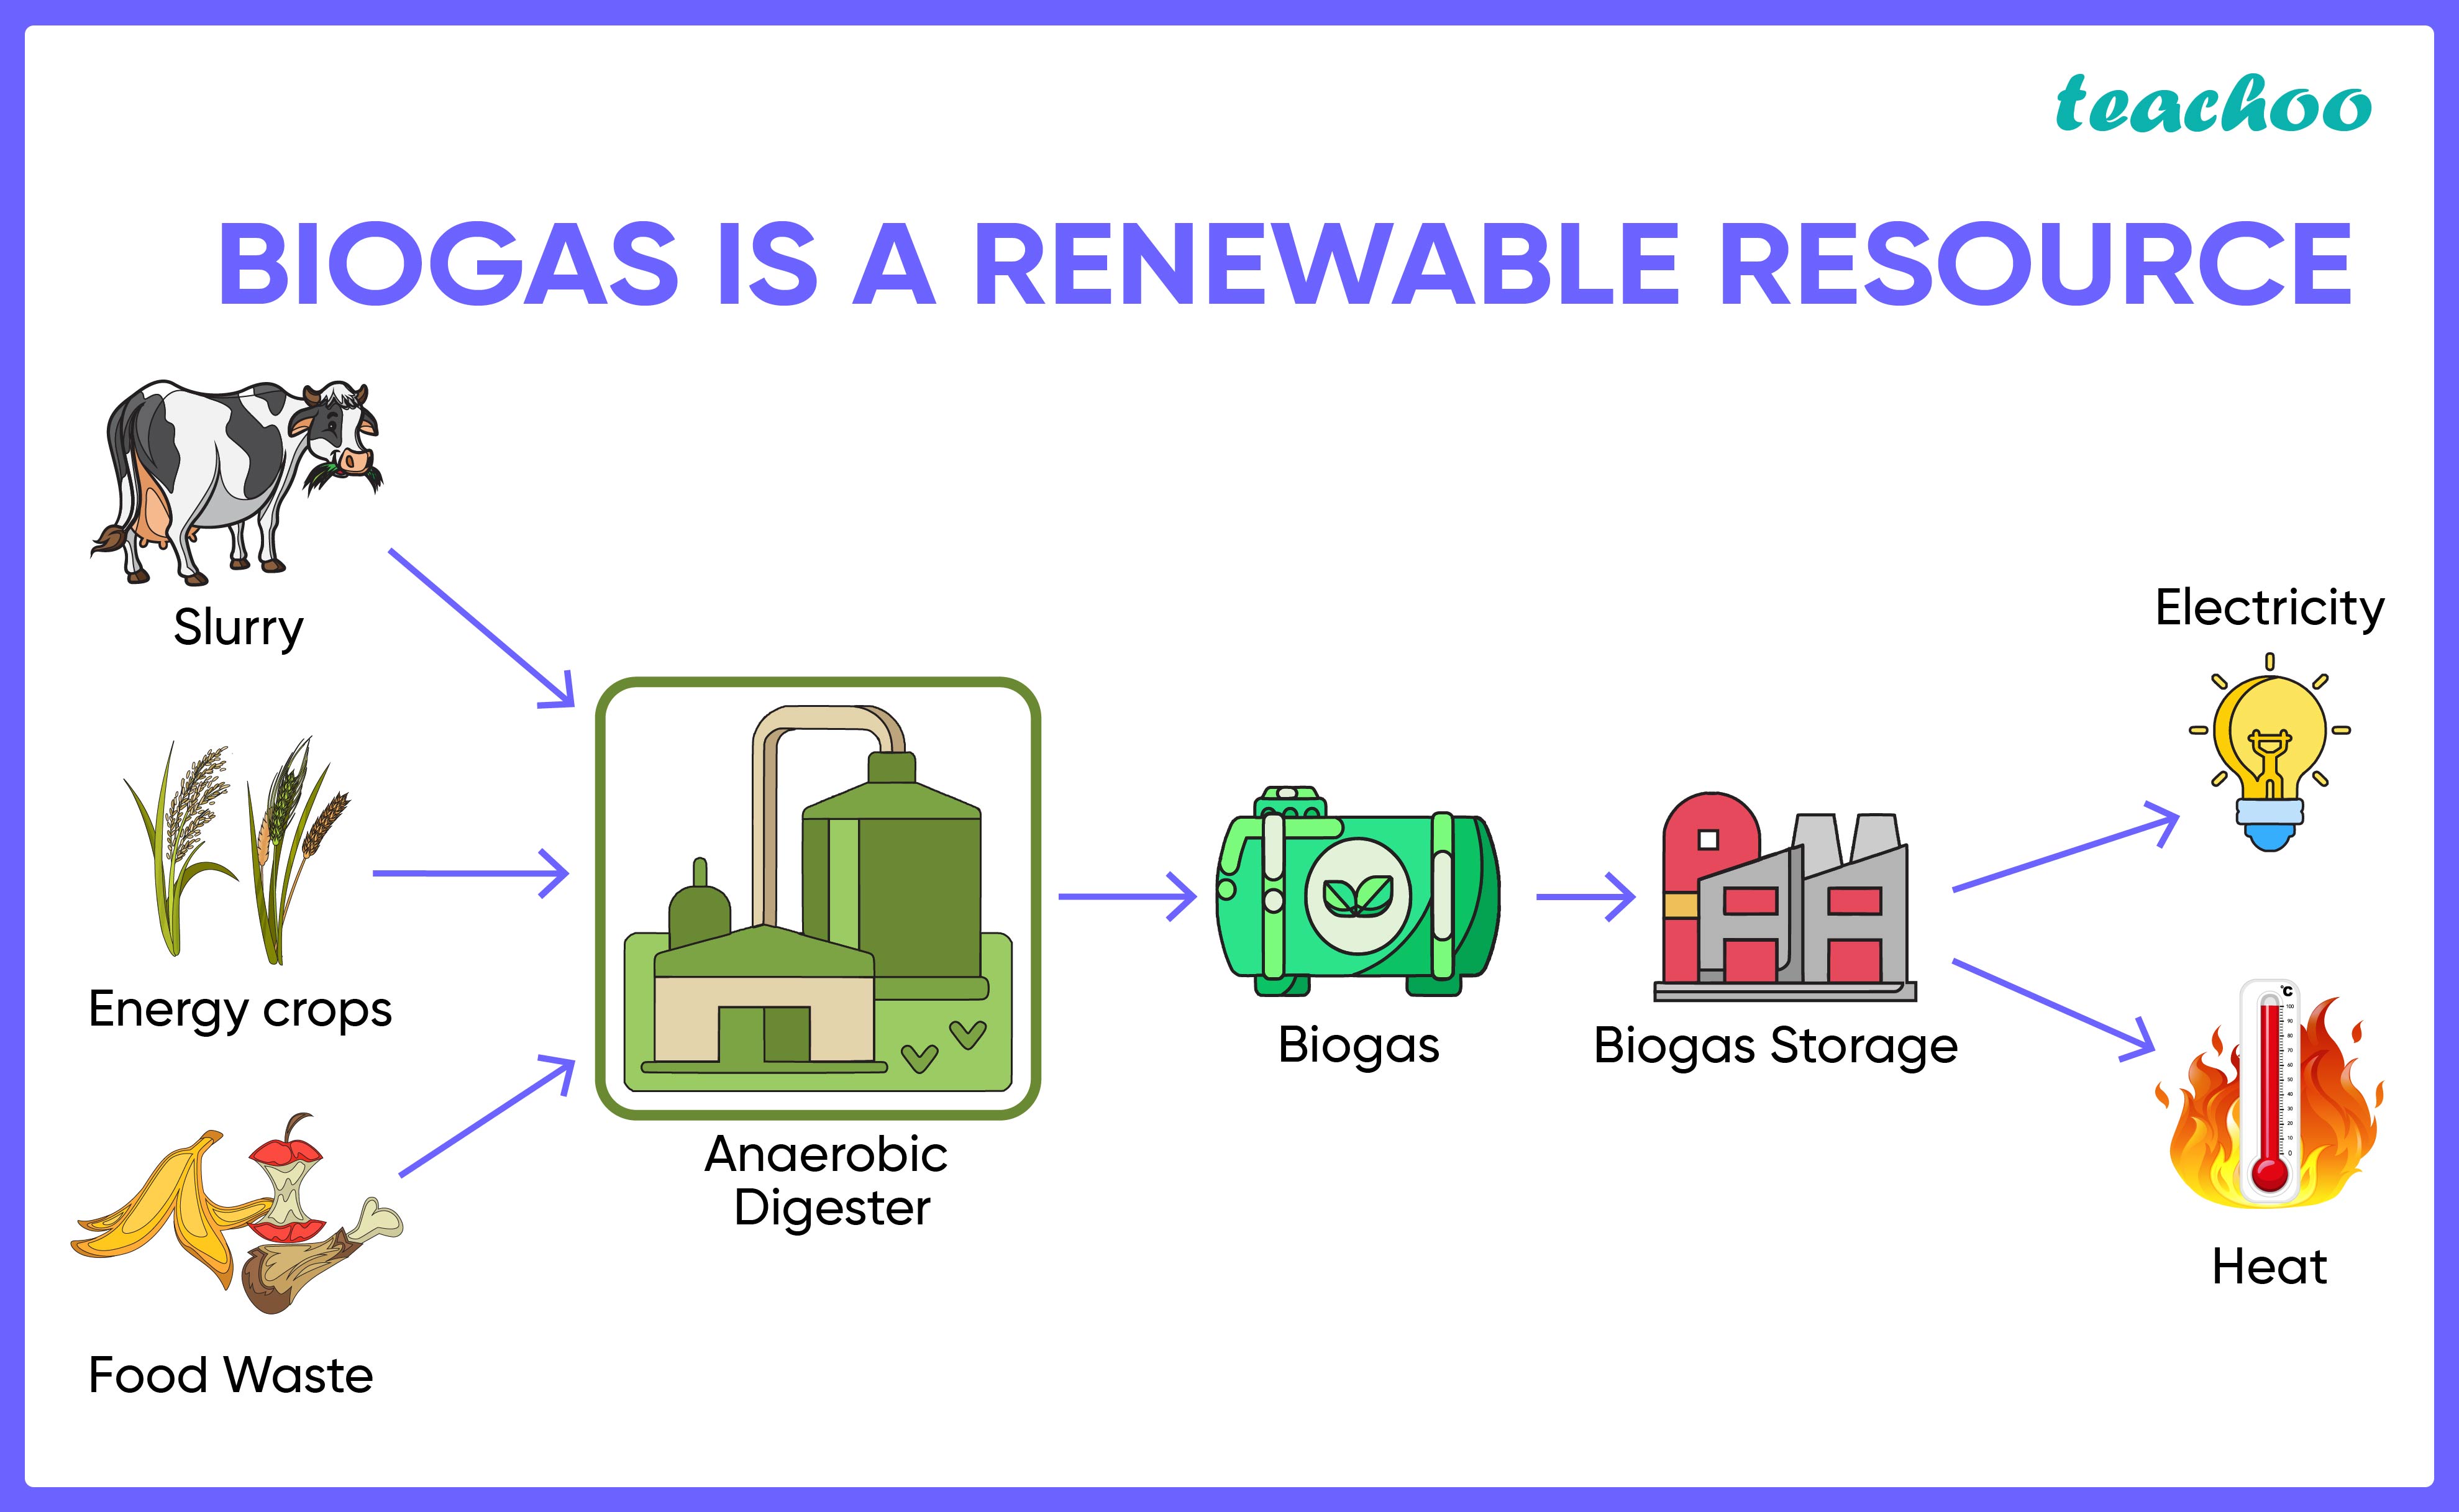 A biogas plant is where biogas is produced by fermenting biomass